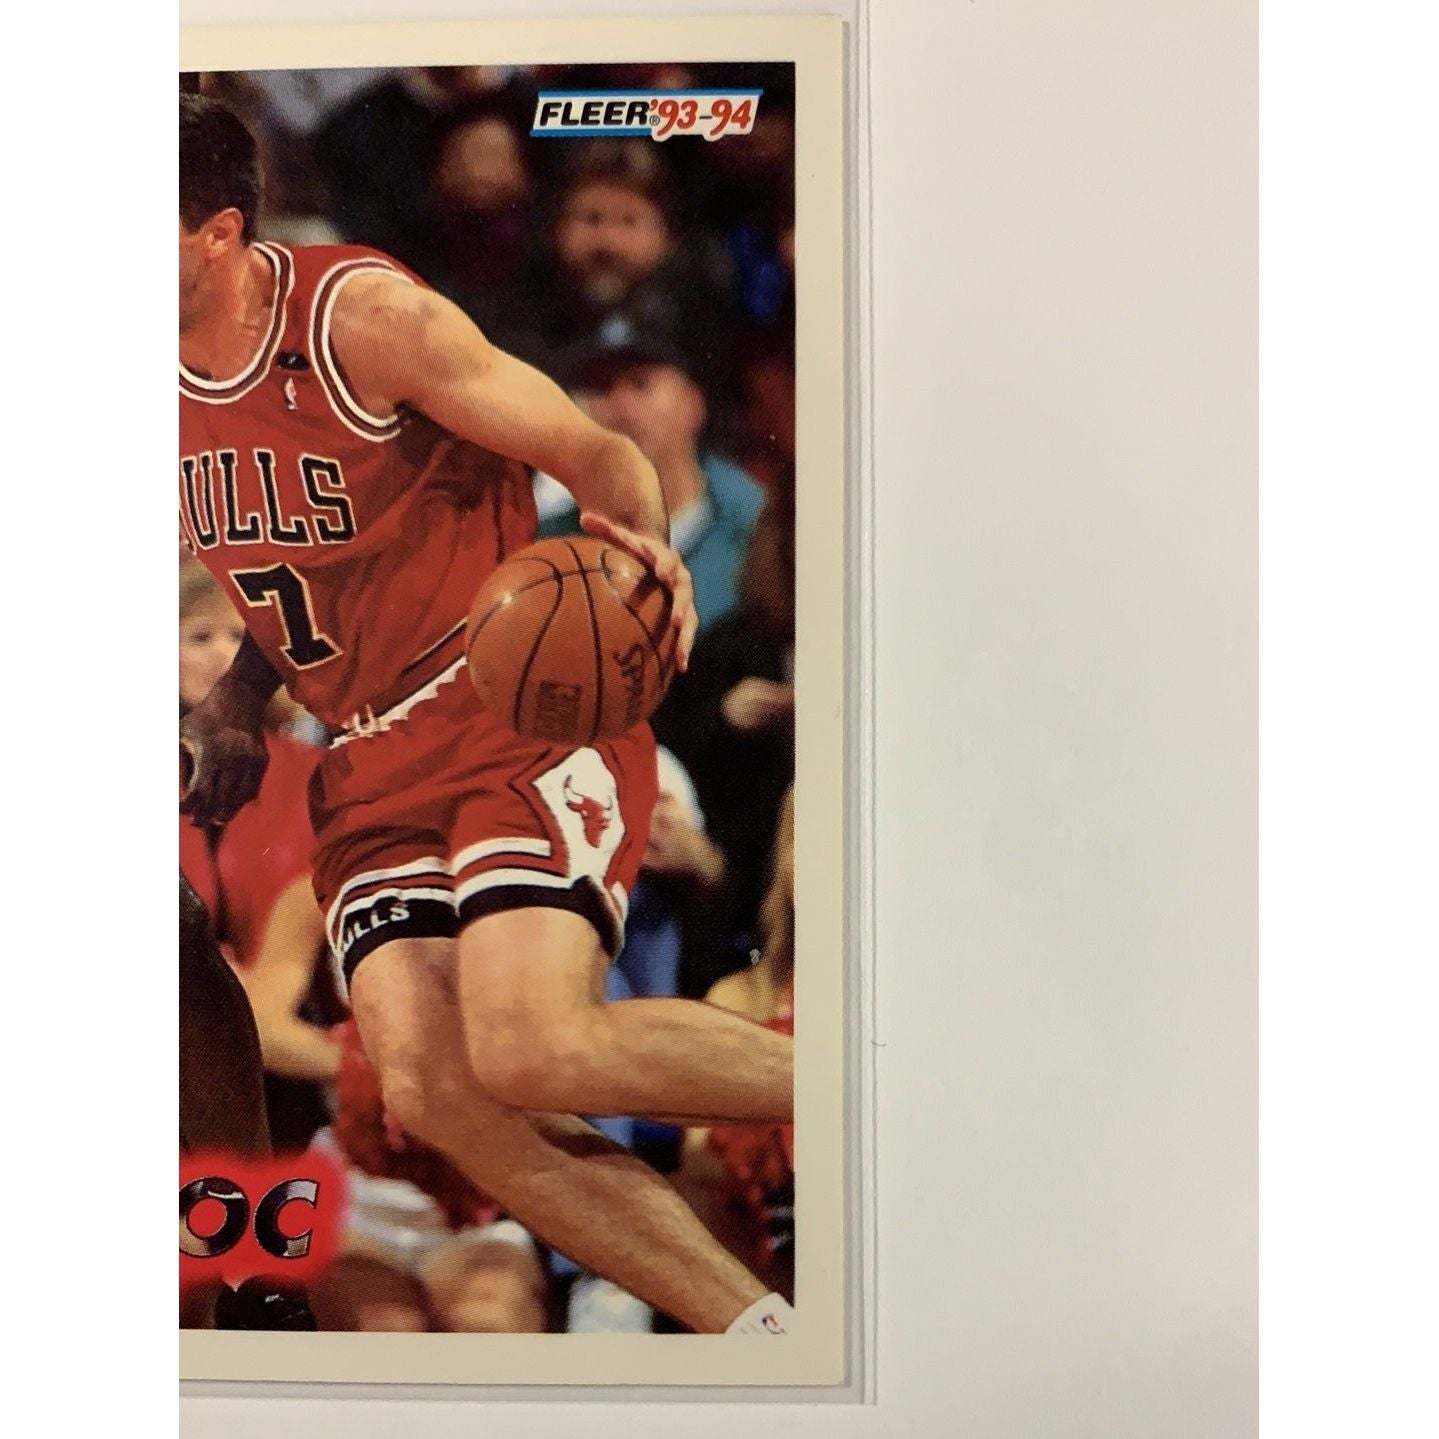  1993-94 Fleer Toni Kukoc Rookie Card  Local Legends Cards & Collectibles